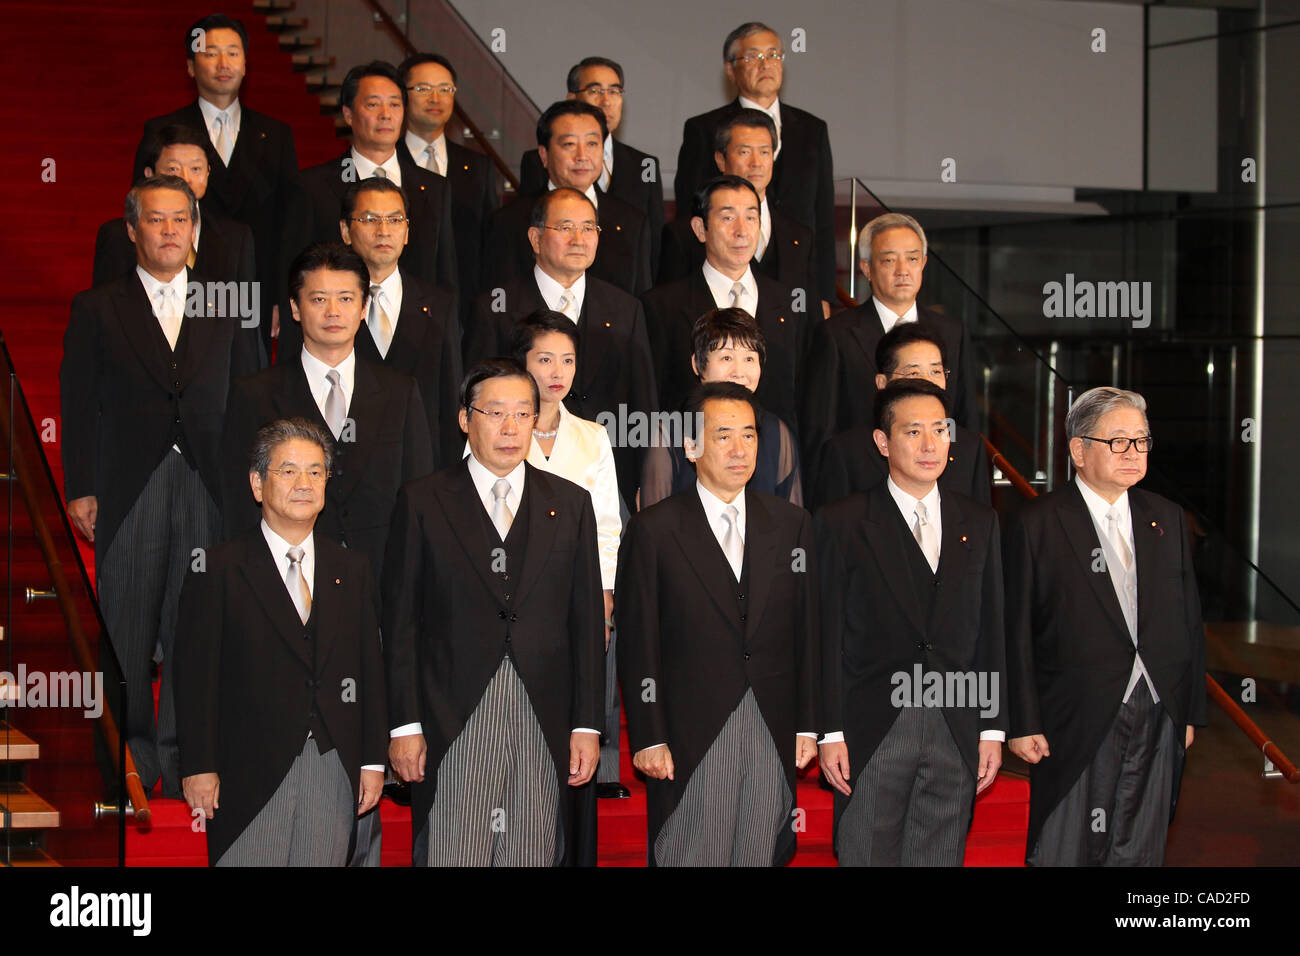 Sep 17, 2010 - Tokyo, Japan -  Japanese Prime Minister and Democratic Party of Japan Naoto Kan (C) poses for photographs with his new cabinet at the Prime Minister's official residence in Tokyo, Japan. Kan reshuffled his cabinet and Seiji Maehara was appointed as the new Foreign Minister. (Credit Im Stock Photo